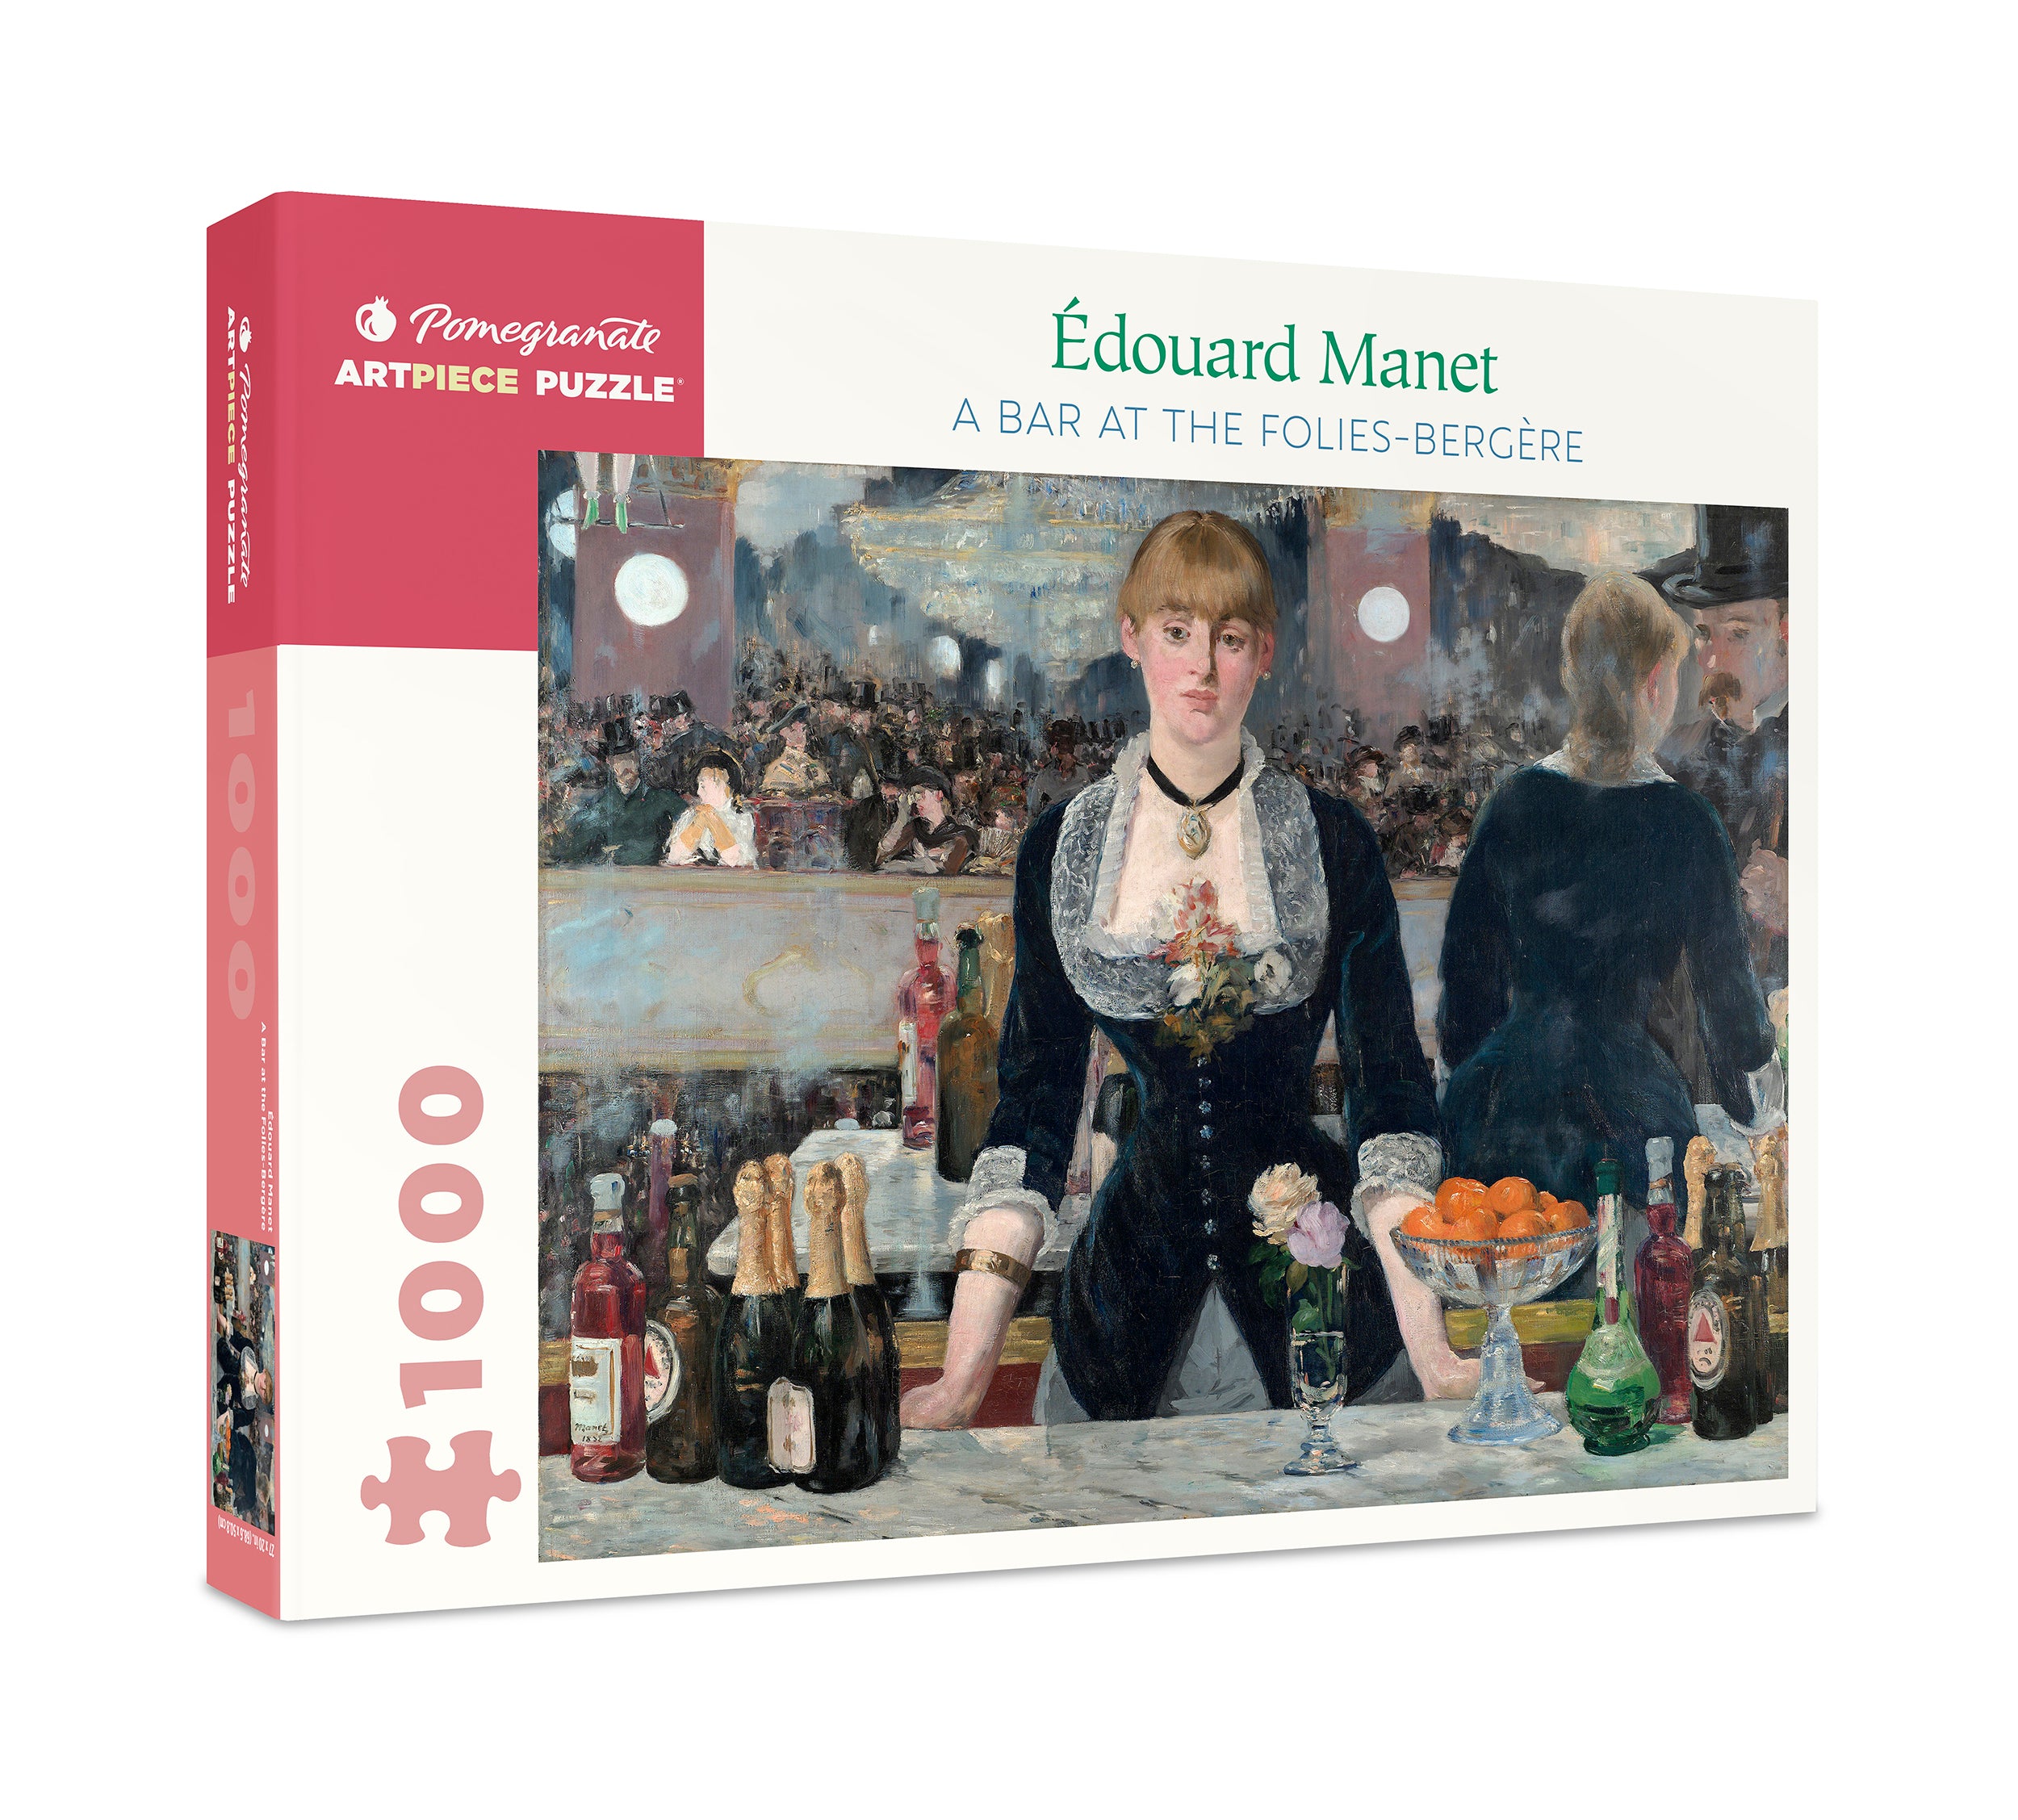 Pomegranate Edouard Manet "A Bar at the Follies-Bergere" 1000 Piece Puzzle